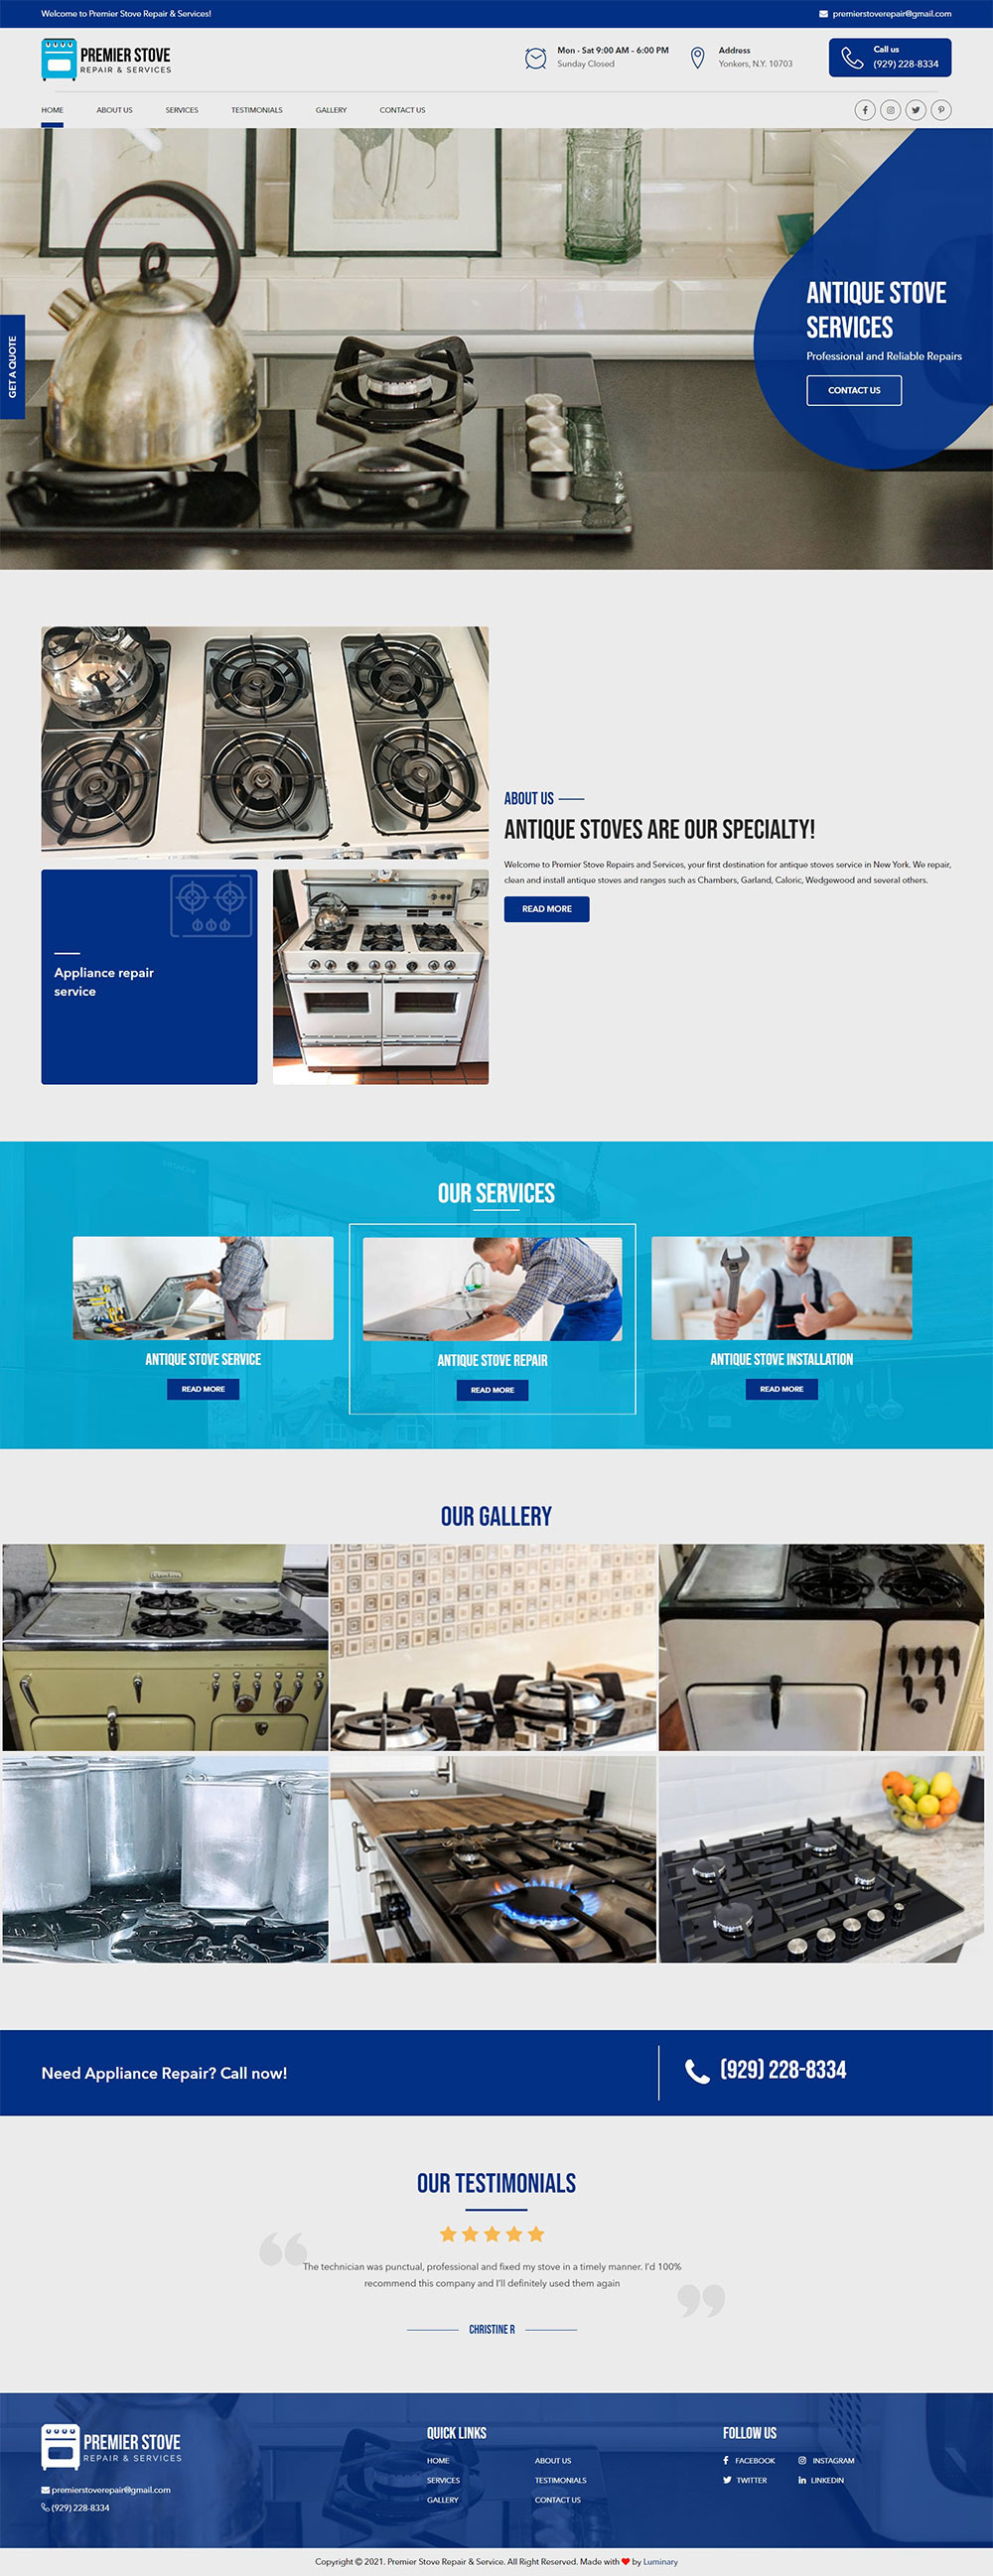 Premier Stove Repairs and Services